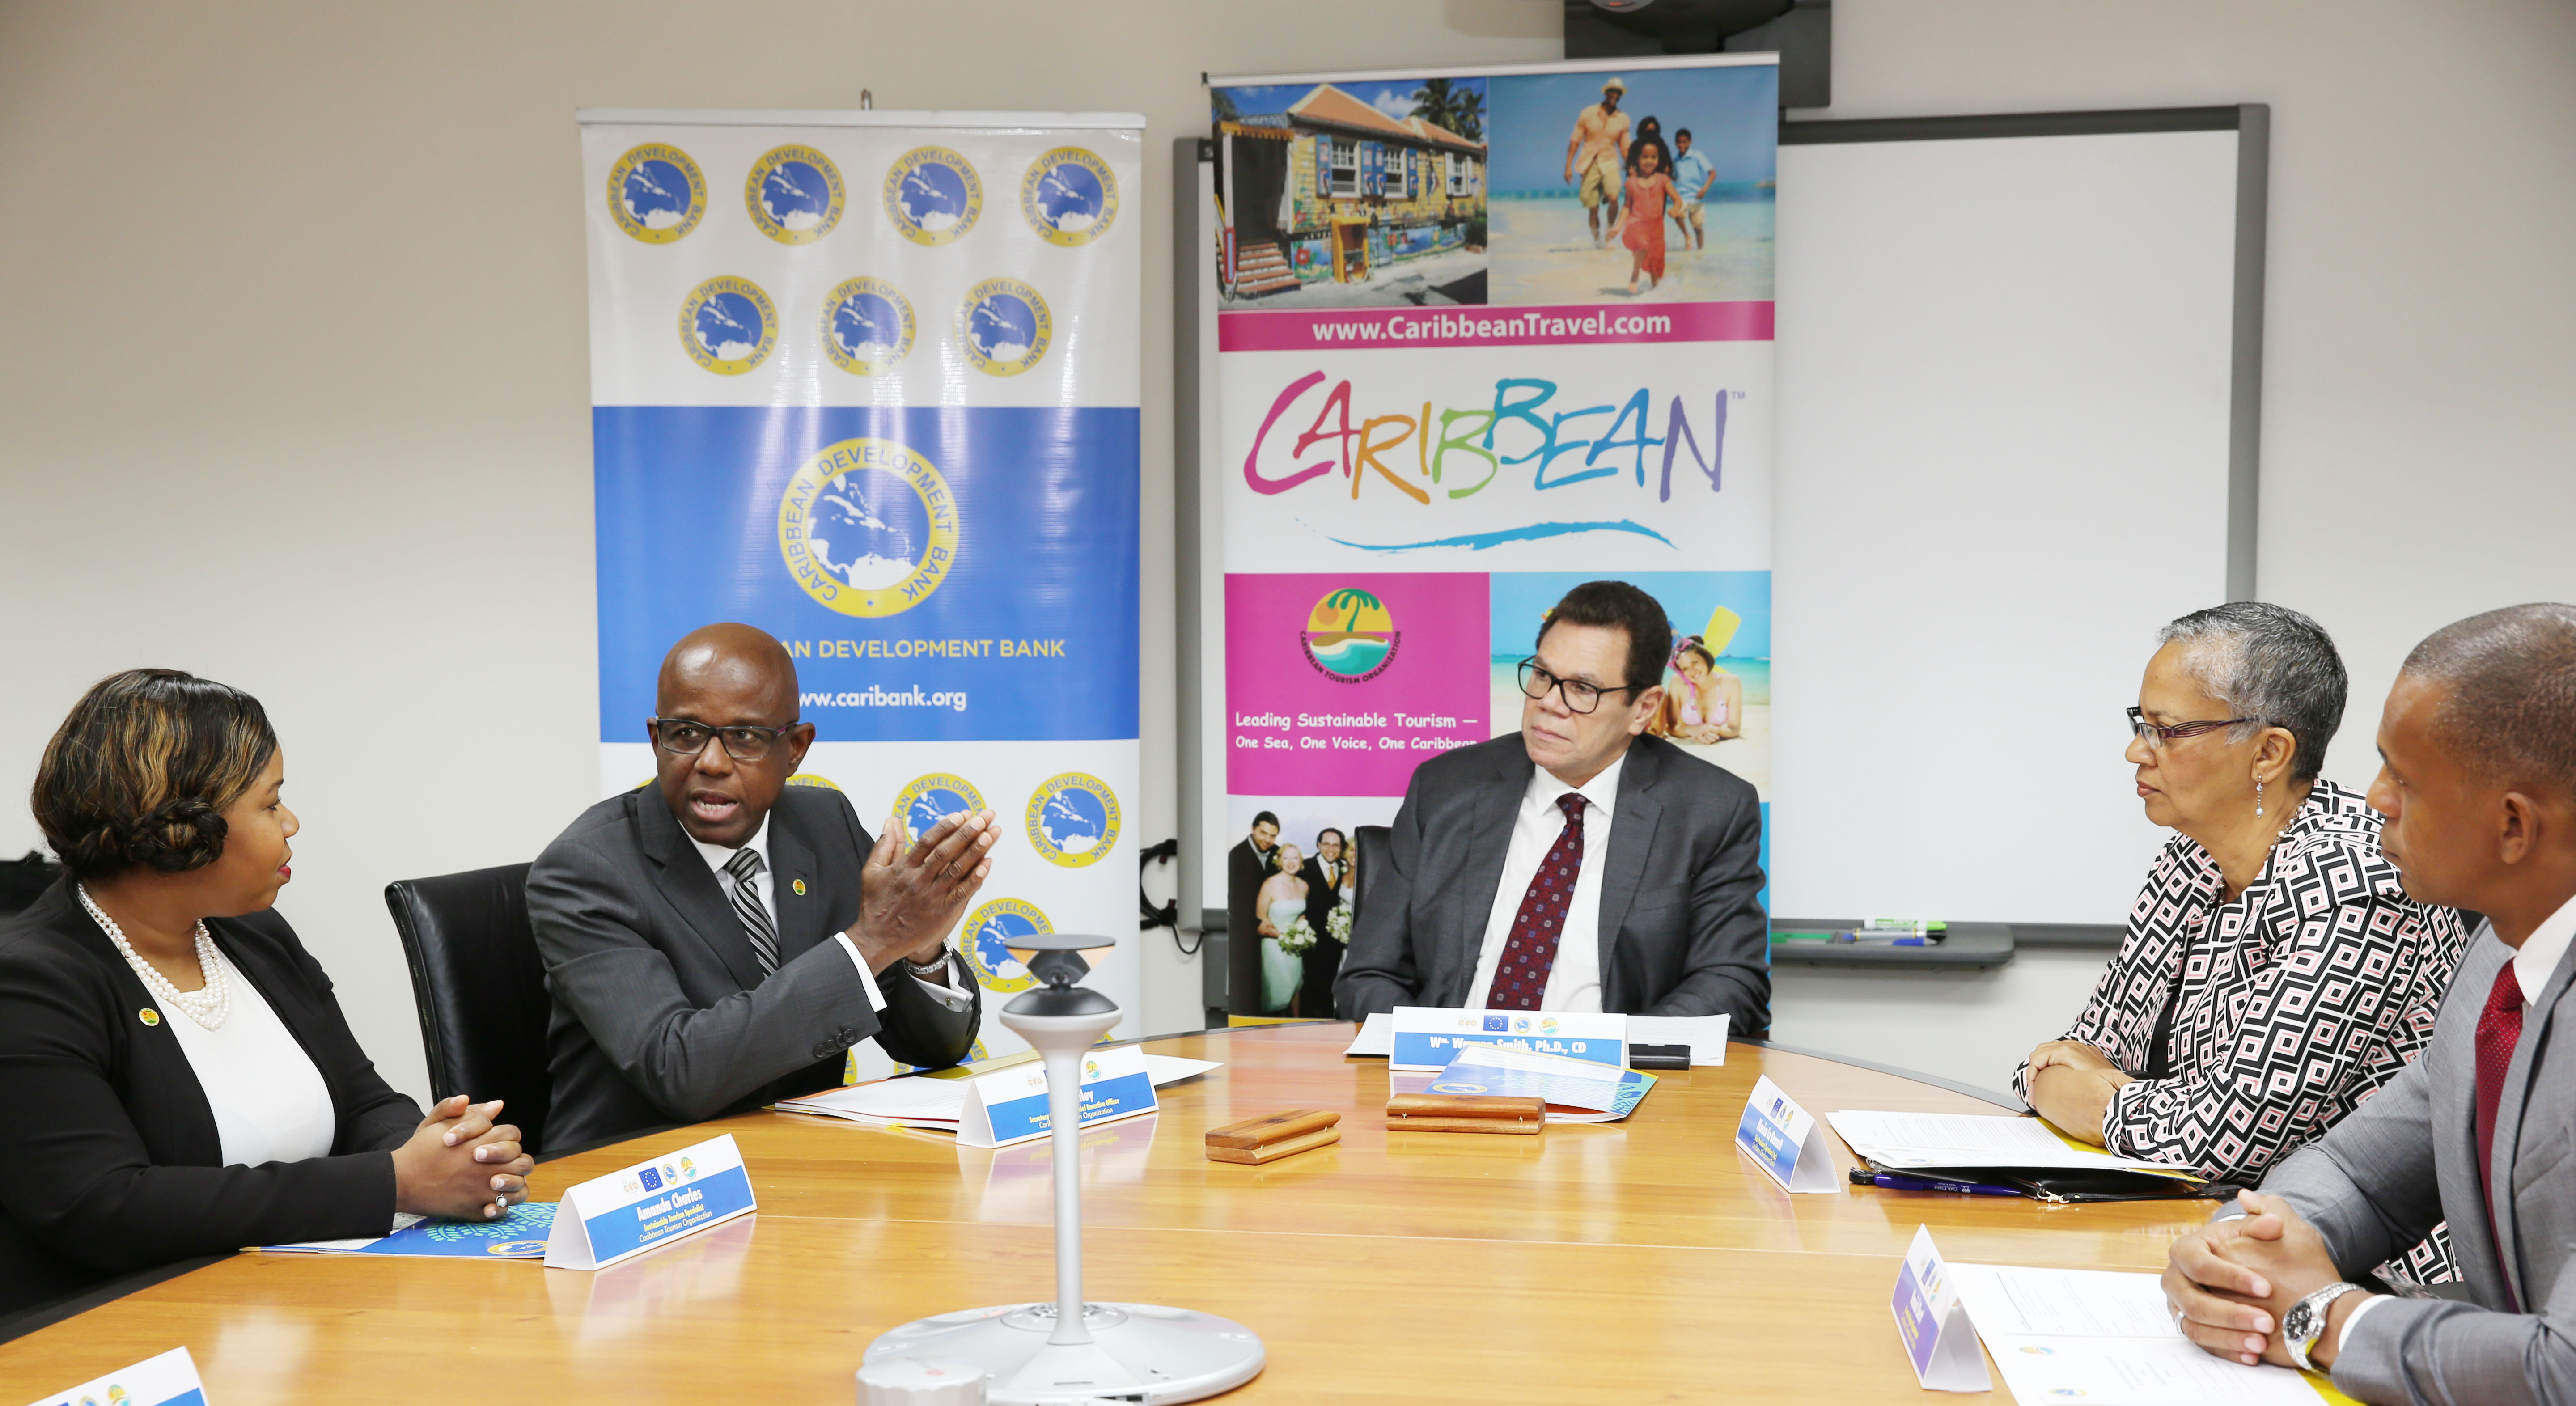 From left to right: Amanda Charles, Sustainable Tourism Development Specialist, CTO; Hugh Riley, Secretary General, CTO; Dr. Wm. Warren Smith, President, CDB; Monica La Bennett, Acting Vice-President (Operations), CDB; and Daniel Best, Director of Projects, CDB chat during the signing ceremony on June 22, 2017.